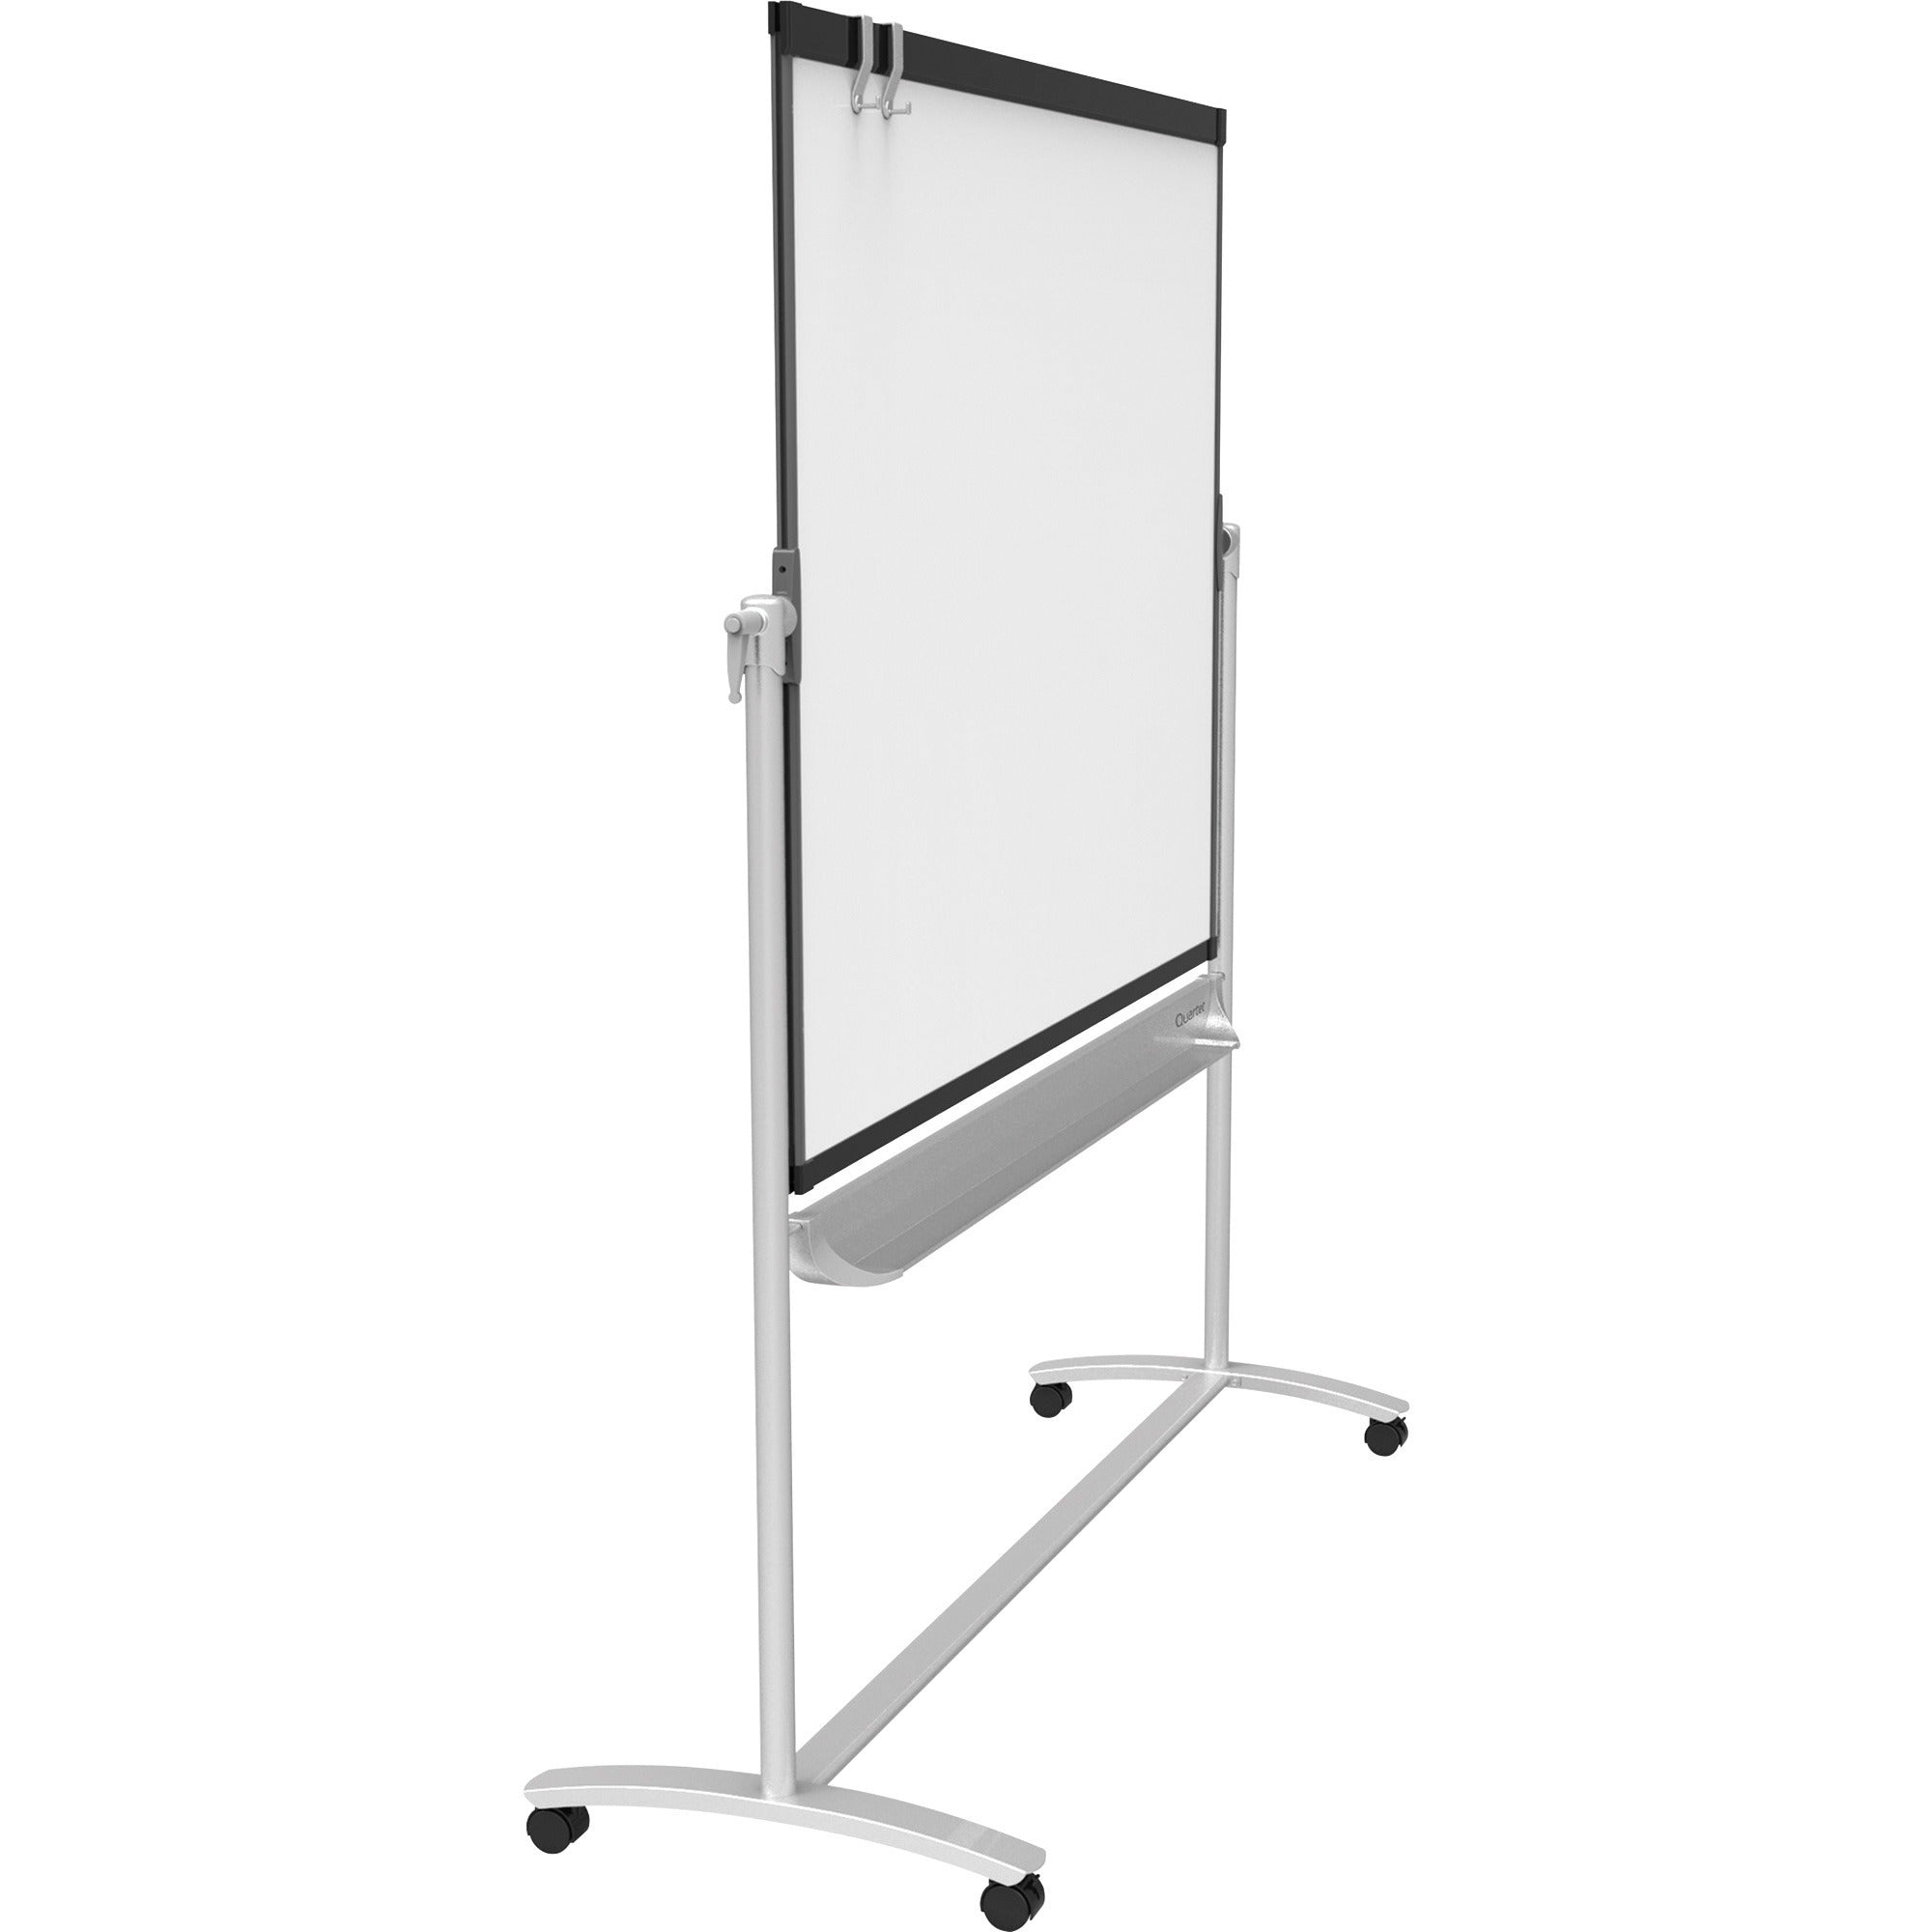 quartet-magnetic-mobile-presentation-easel-48-4-ft-width-x-36-3-ft-height-white-painted-steel-surface-graphite-frame-magnetic-assembly-required-1-each_qrtecm43p2 - 3